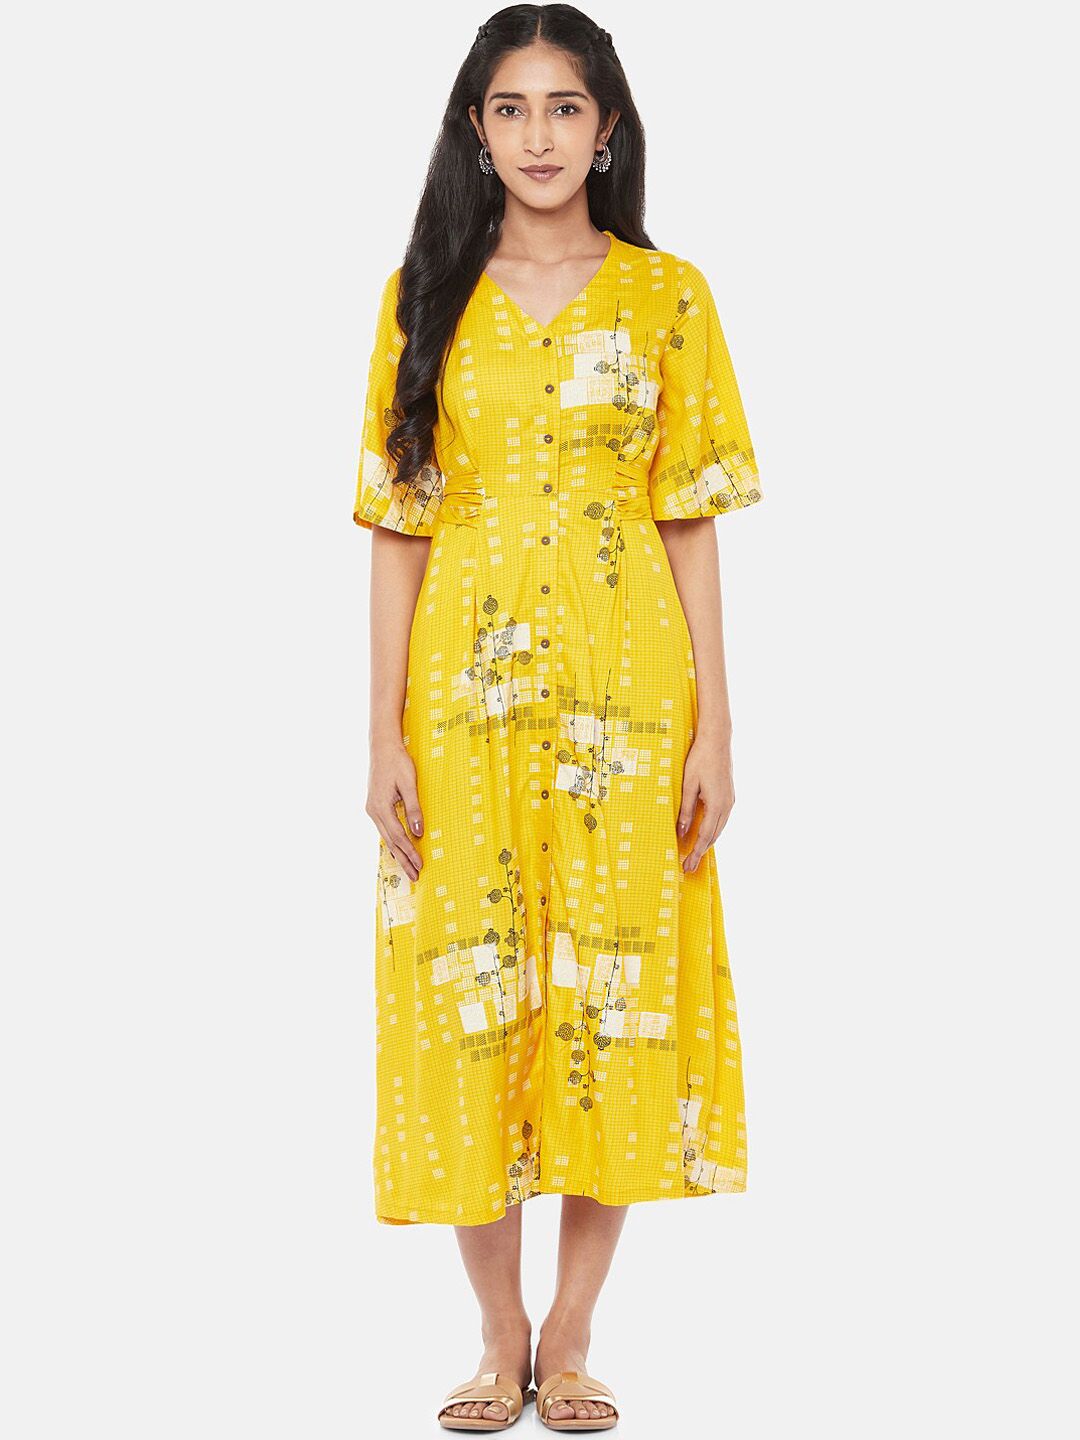 AKKRITI BY PANTALOONS Women Mustard Printed Fit and Flare Dress Price in India